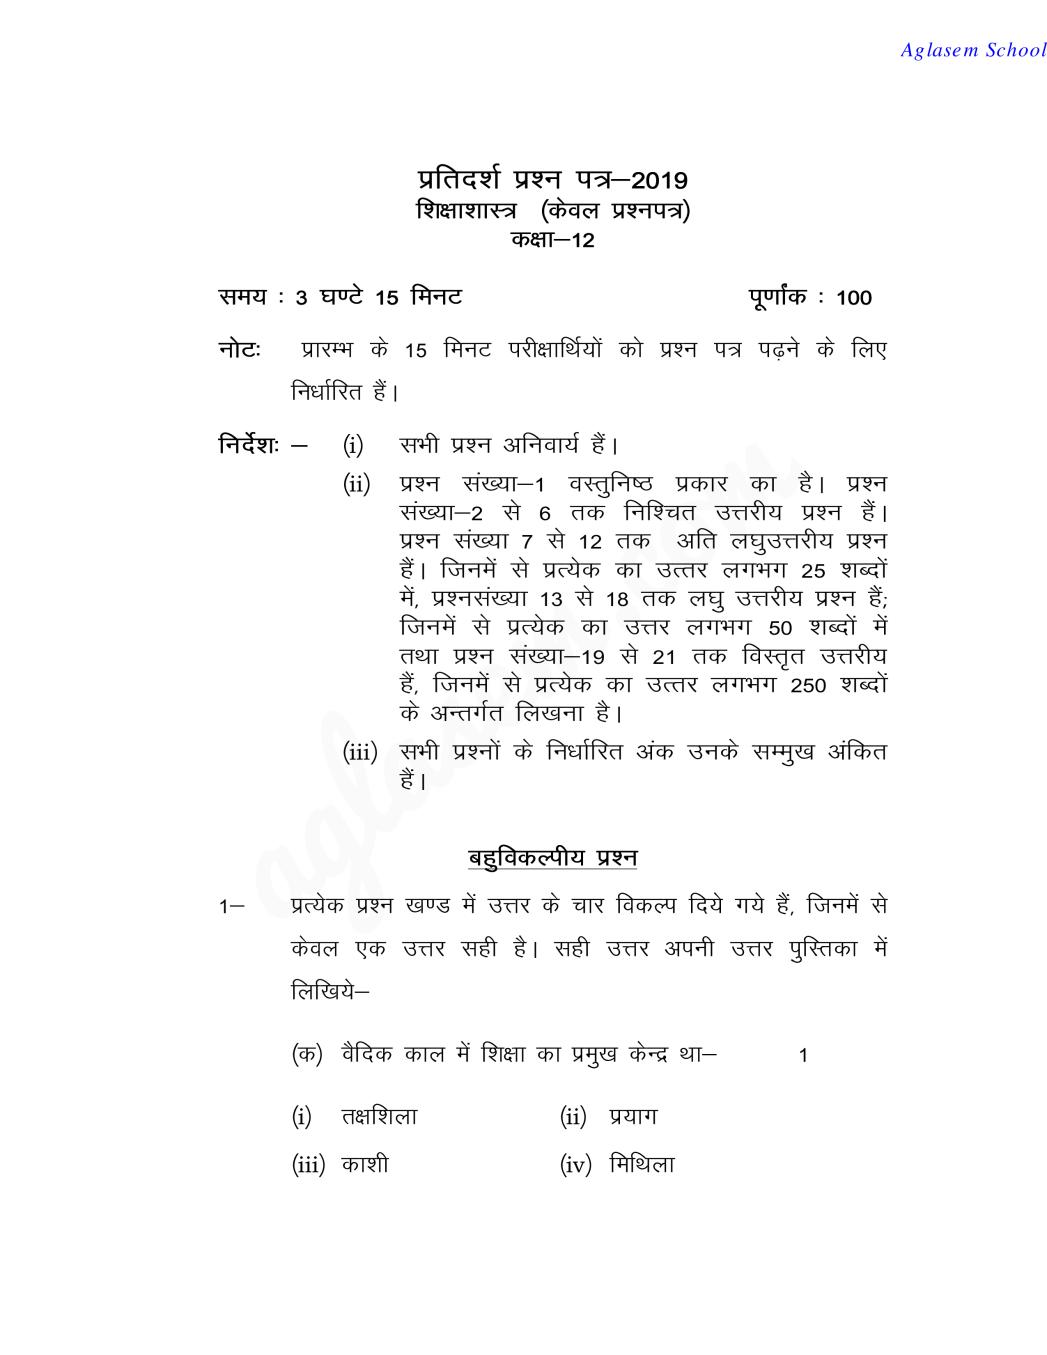 UP Board Class 12 Model Paper 2019 EDUCATION - Page 1